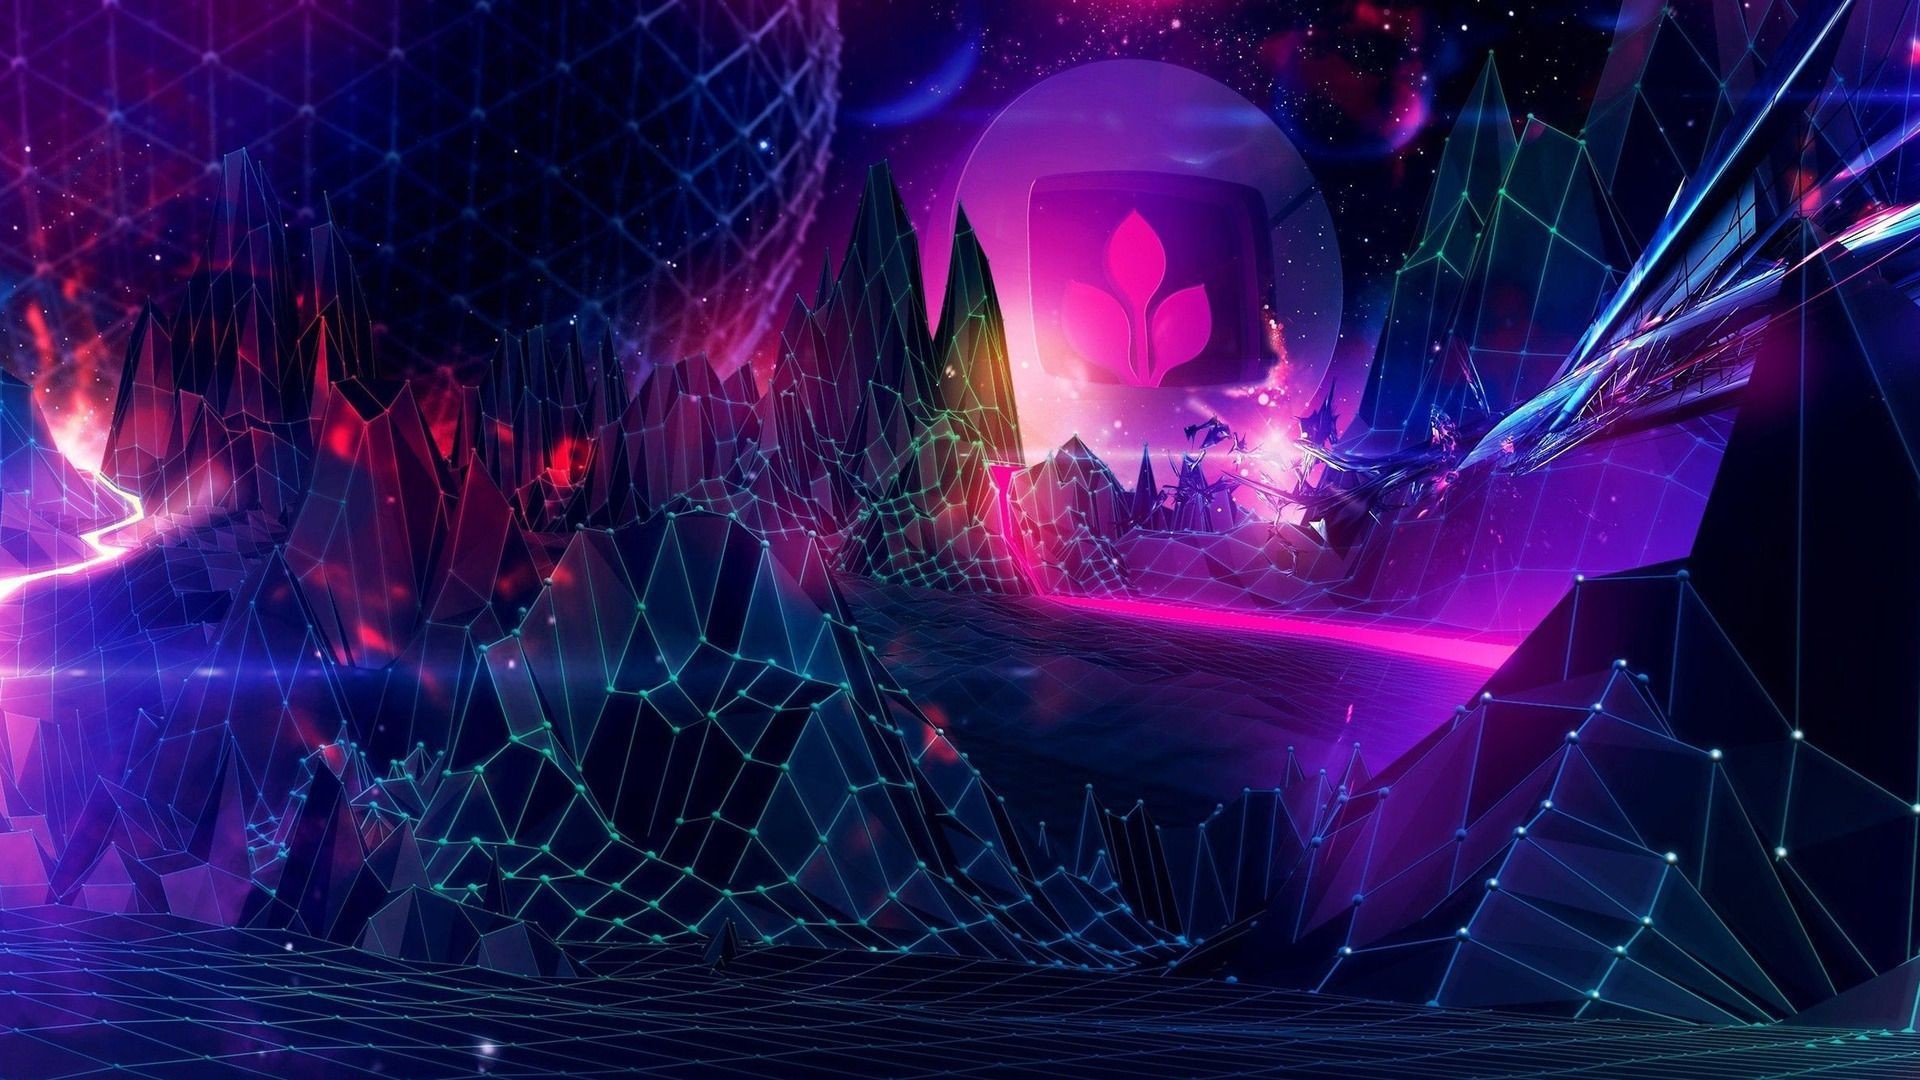 1920x1080 For-e-Psychedelic-Trippy-Hd-Psychedelics-wallpaper-wp68011255